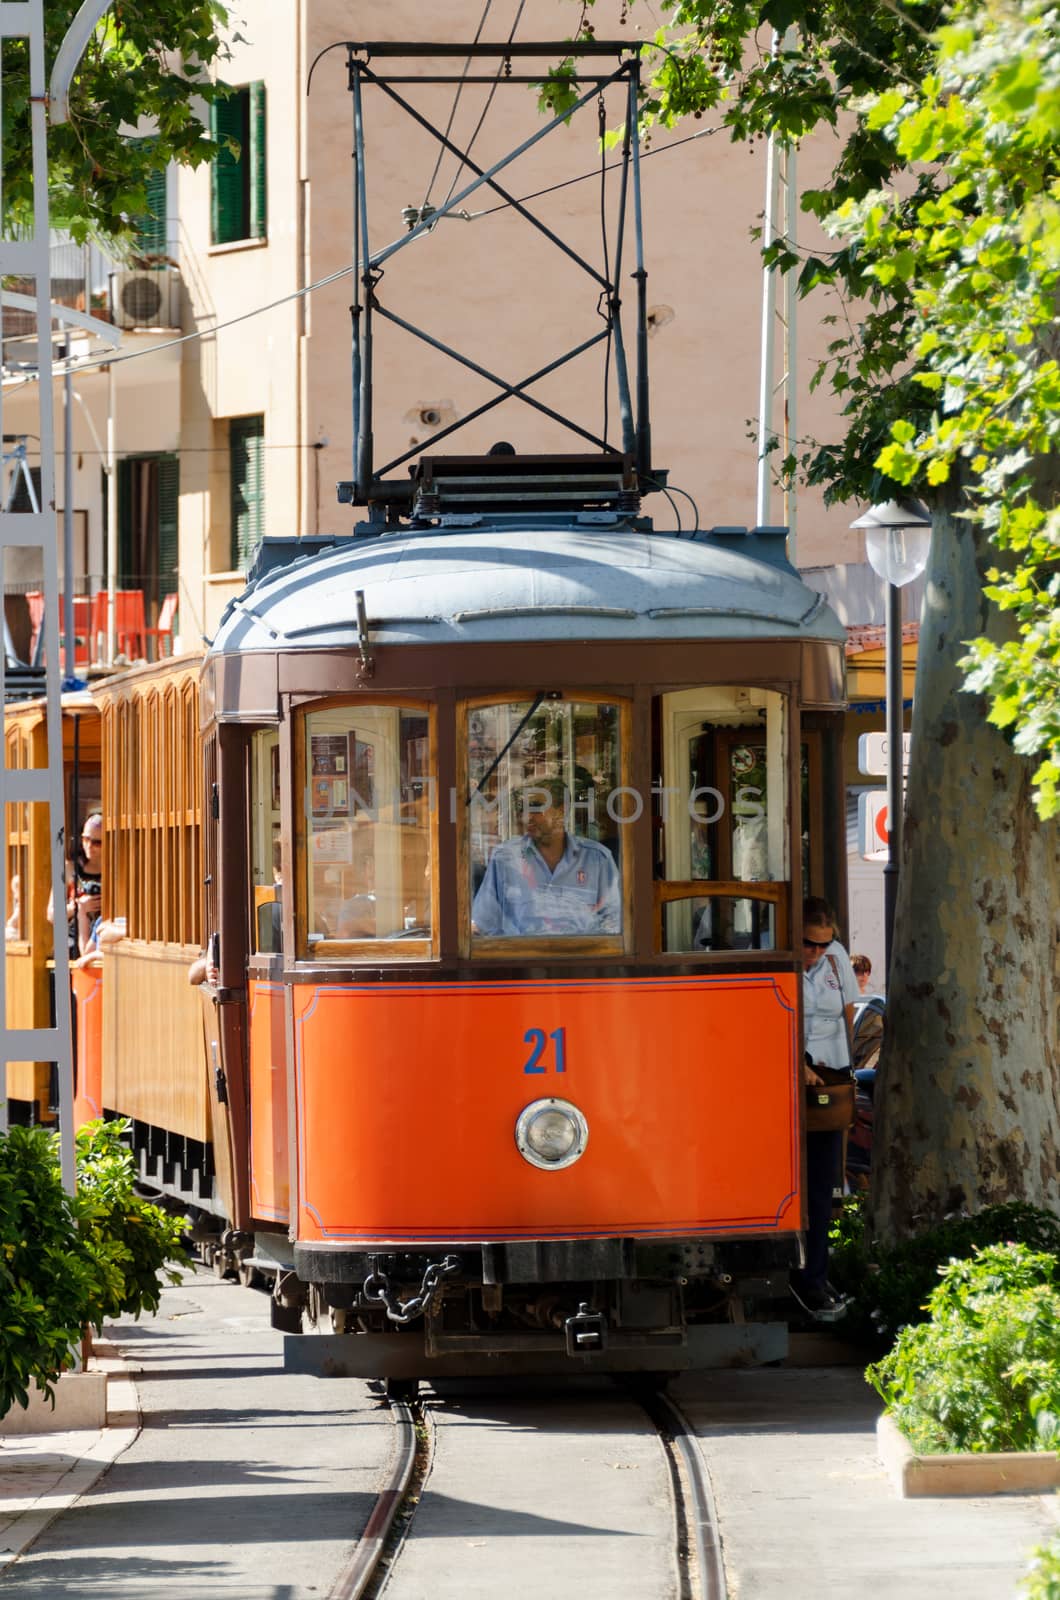 PORT DE SOLLER, SPAIN, JULY 17: The tramway connecting the town to Soller opened in 1913 and is about 5 km long. Some of its original, 1913-built cars are still in service on the line. Pictured on July 17, 2012